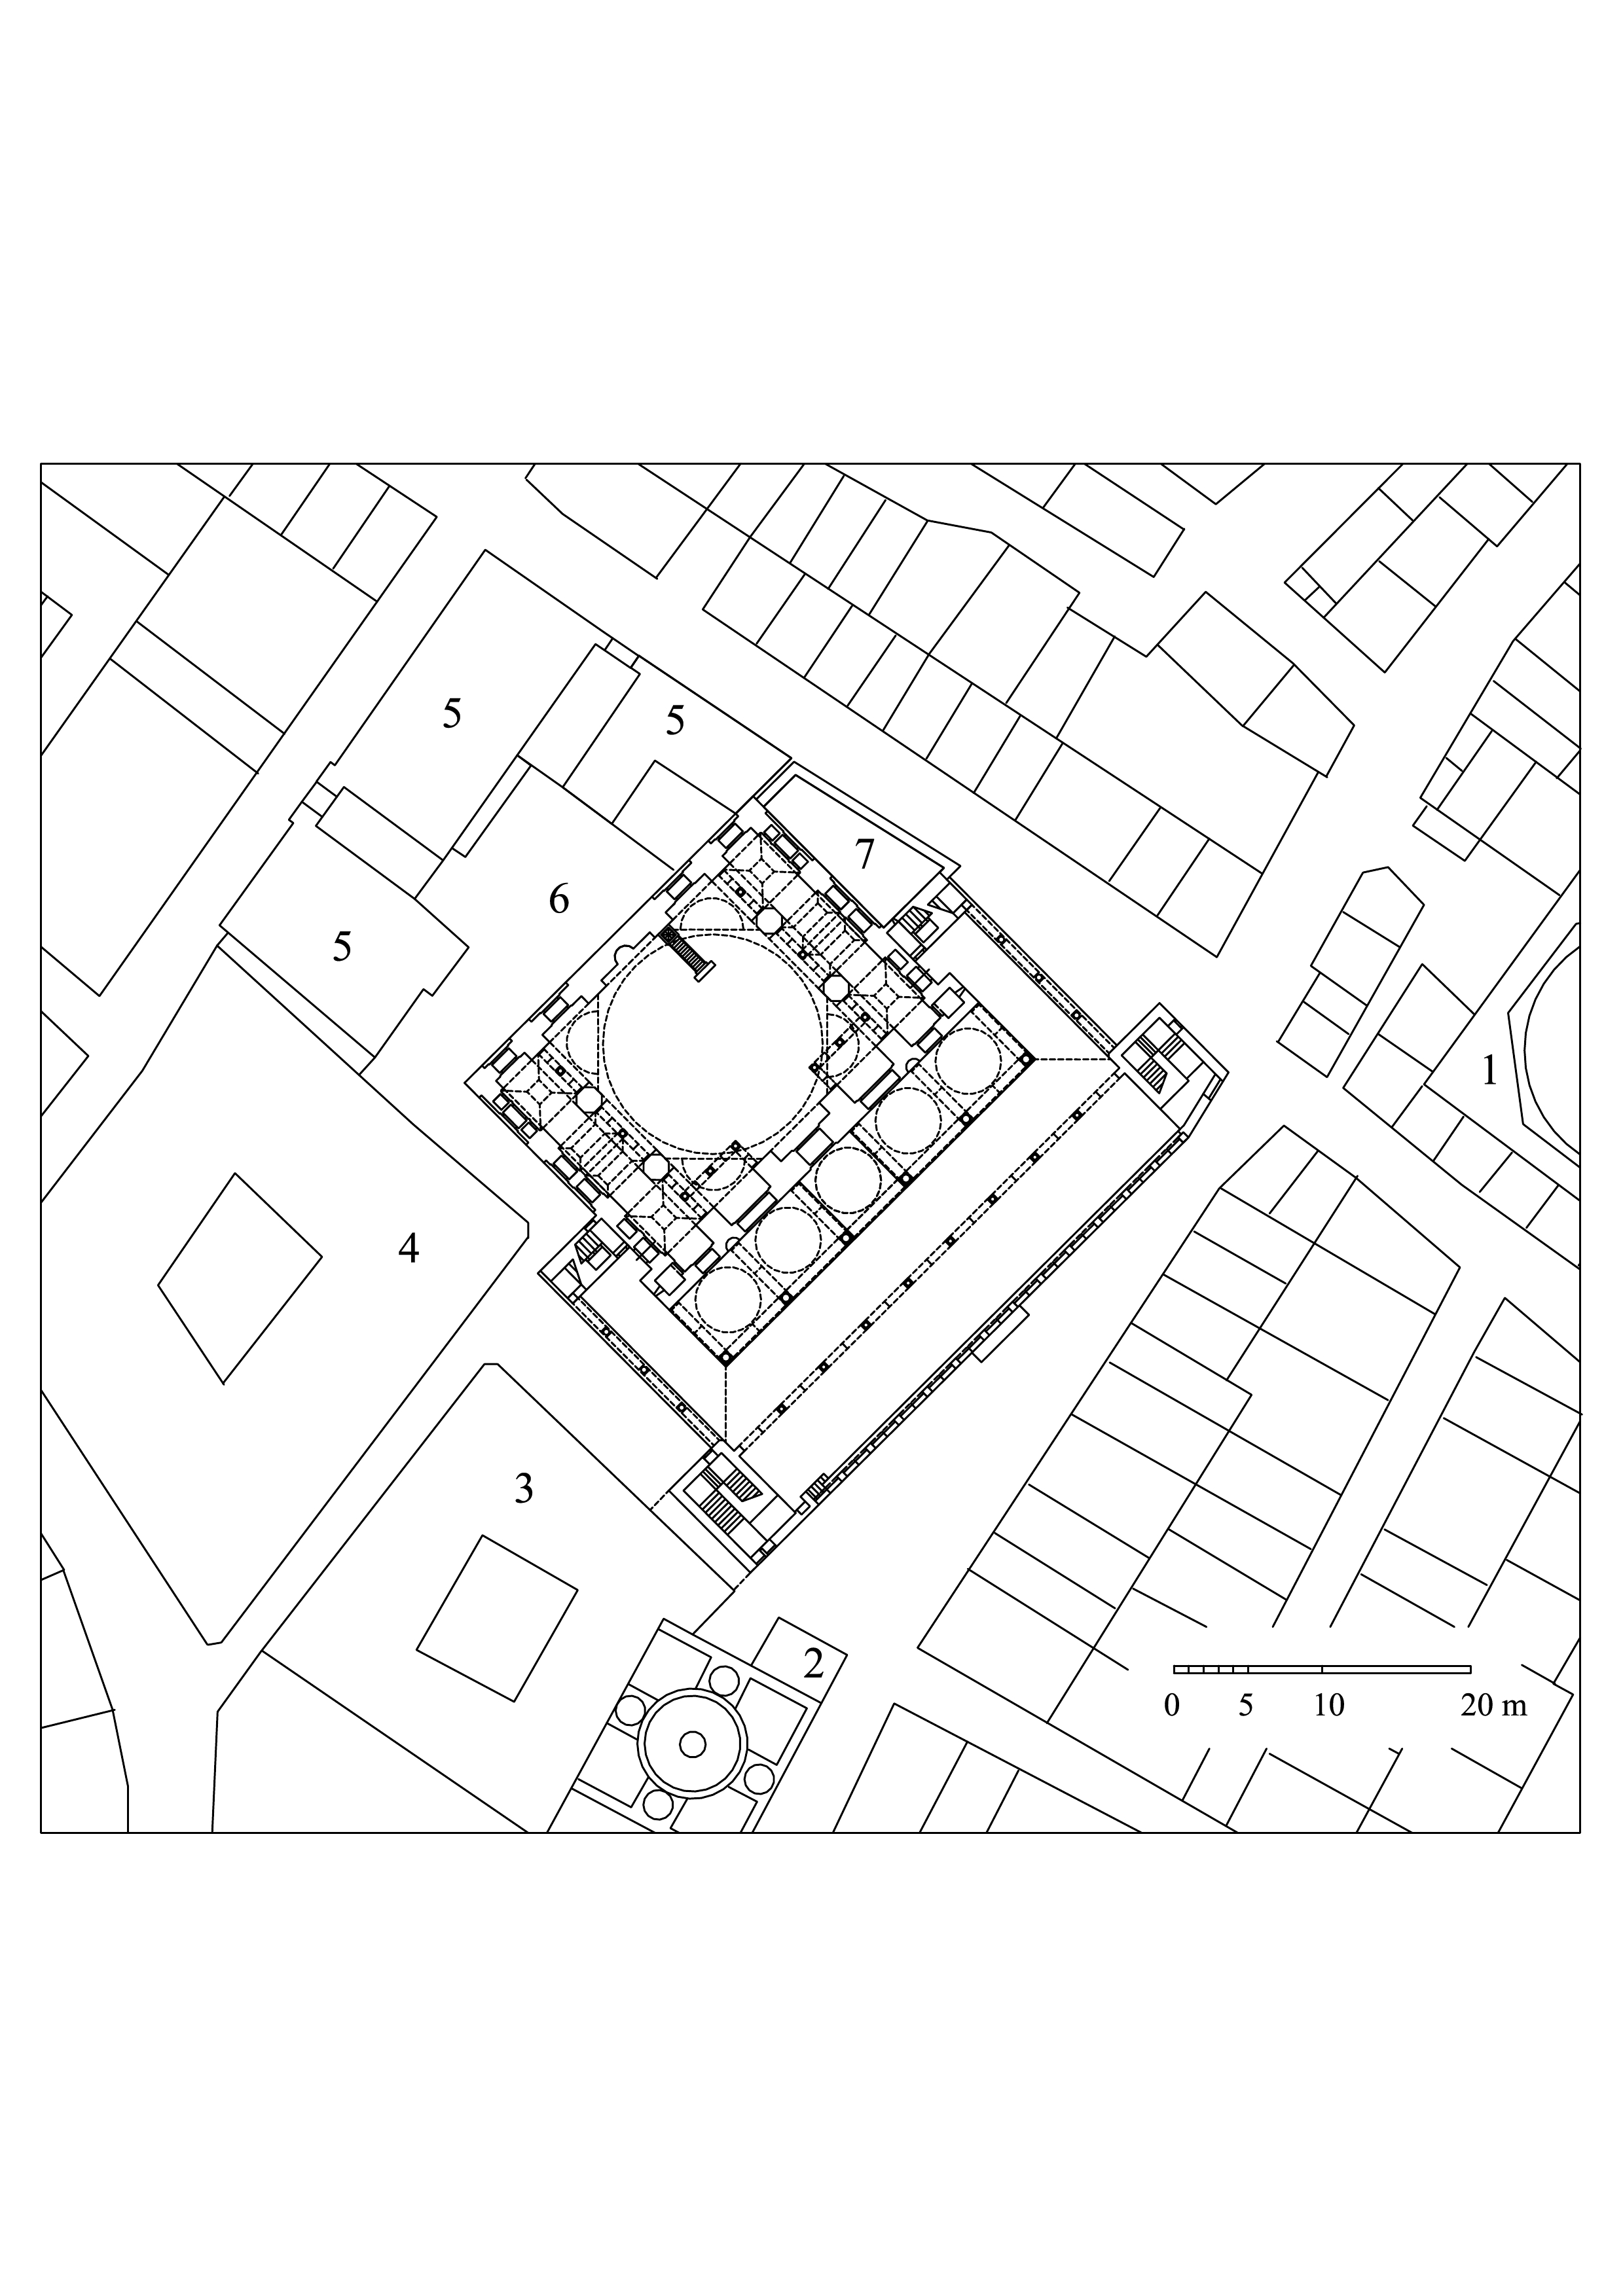 Rüstem Paşa Camii - Floor plan of mosque, with footprint of surrounding structures: (1) pre-existing bathhouse, (2) ablution fountain at the head of Uzunçarsi, (3) Küçük Çukur Han, (4) Büyük Çukur Han, (5) Burmali Han (law court), (6) courtyard of the law court, (7) cemetery garden. DWG file in AutoCAD 2000 format. Click the download button to download a zipped file containing the .dwg file.